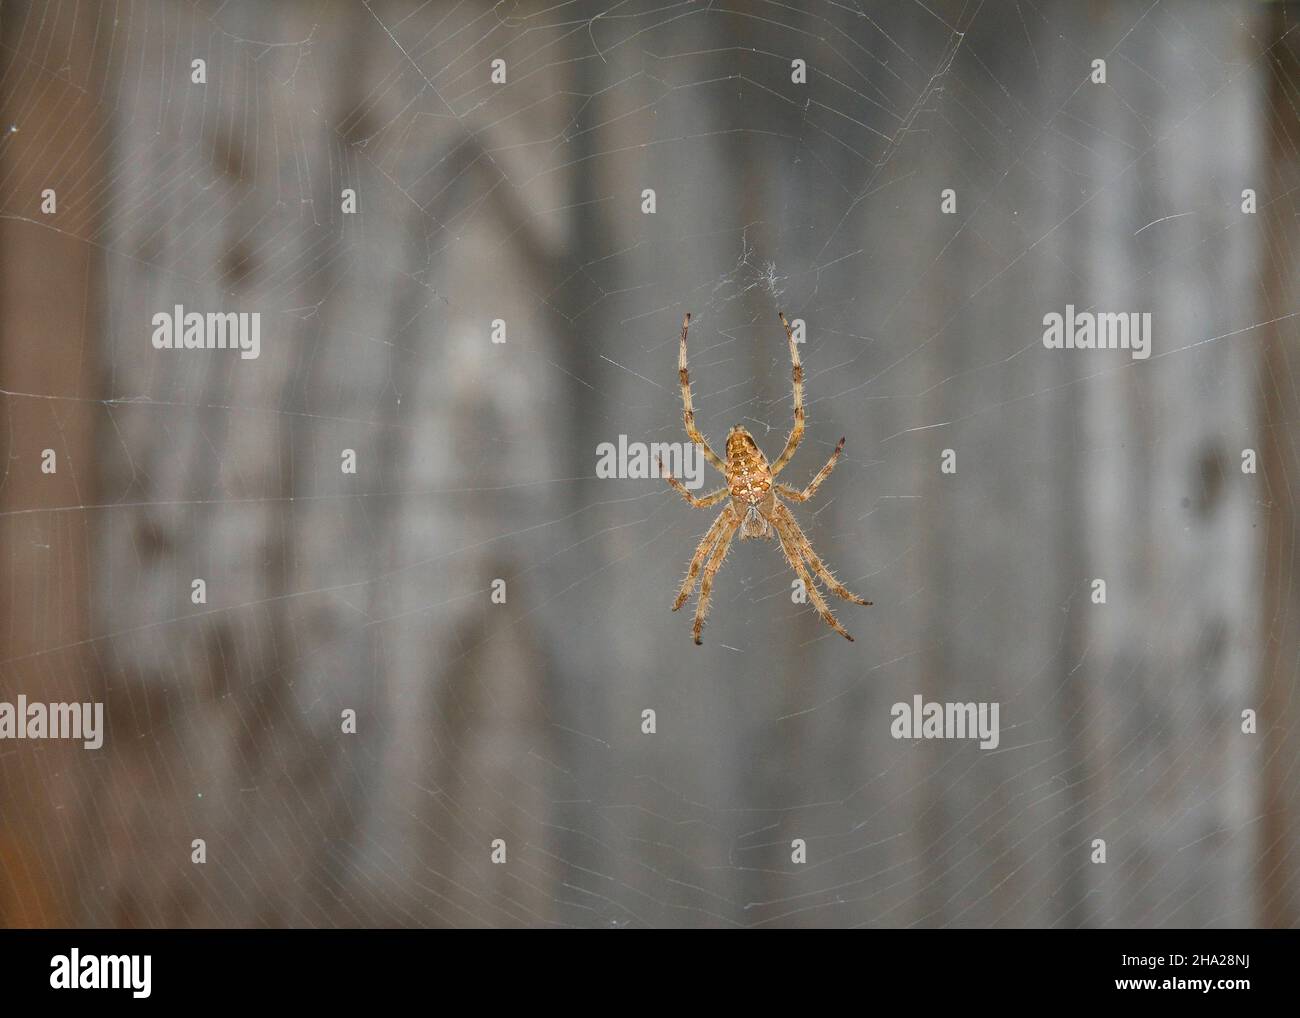 One Neoscona crucifera, an orb-weaver spider,  motionless on its web, wood gate in background. Dorsal view of spider. Stock Photo